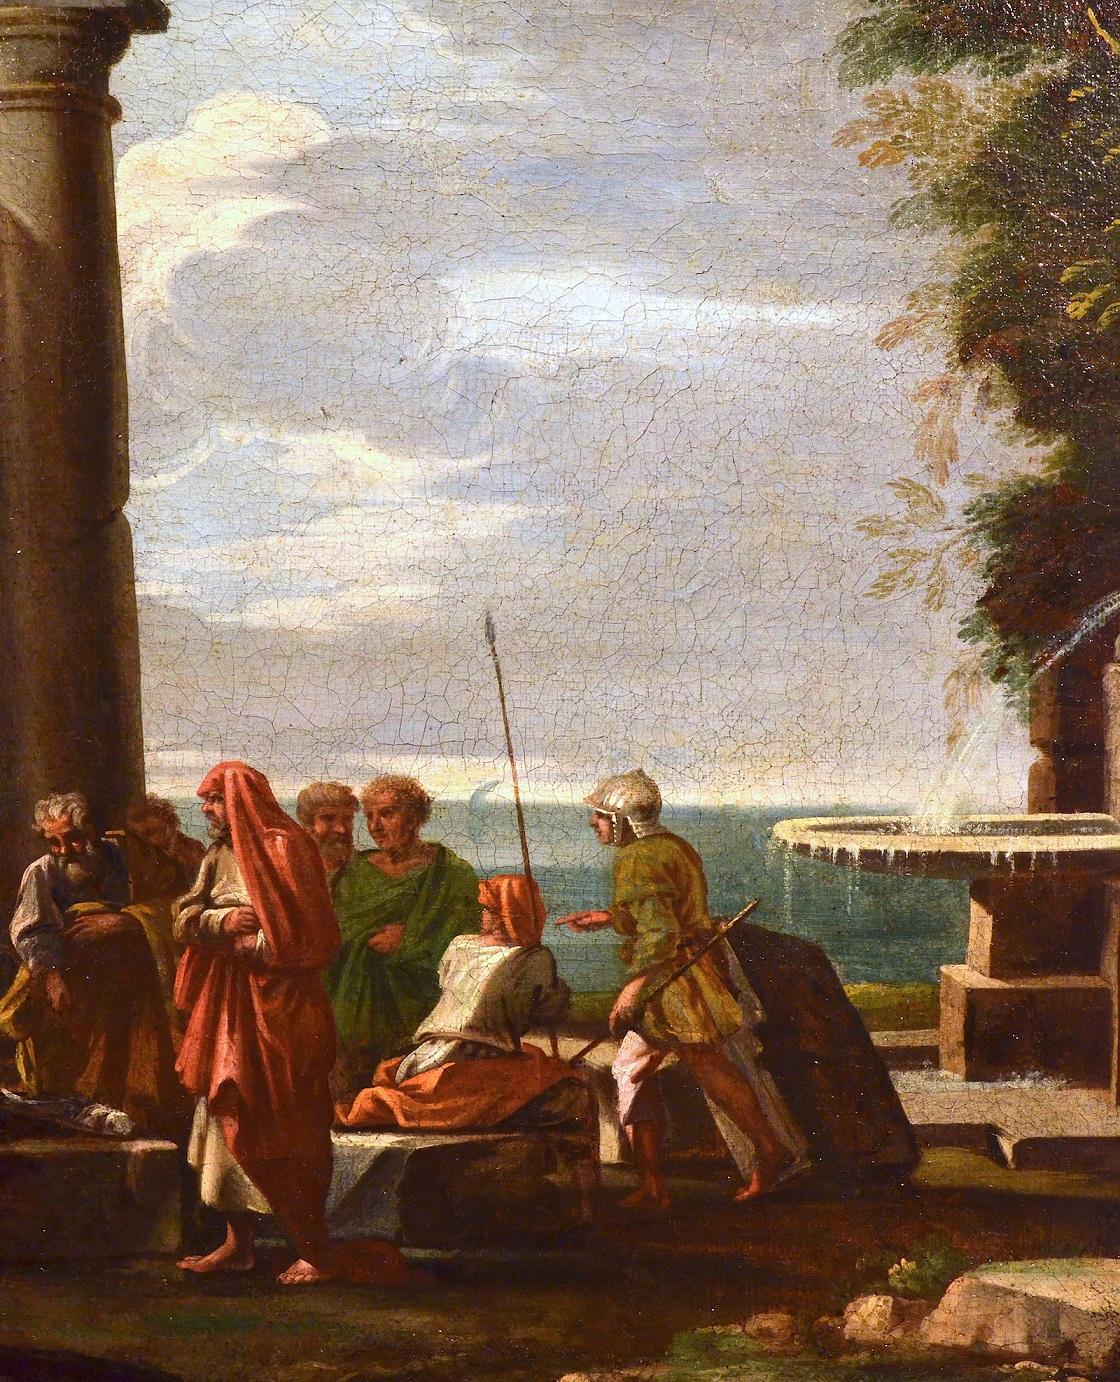 Ghisolfi Paint Oil on canvas Old master 17th Century Architectural Capriccio Art For Sale 1